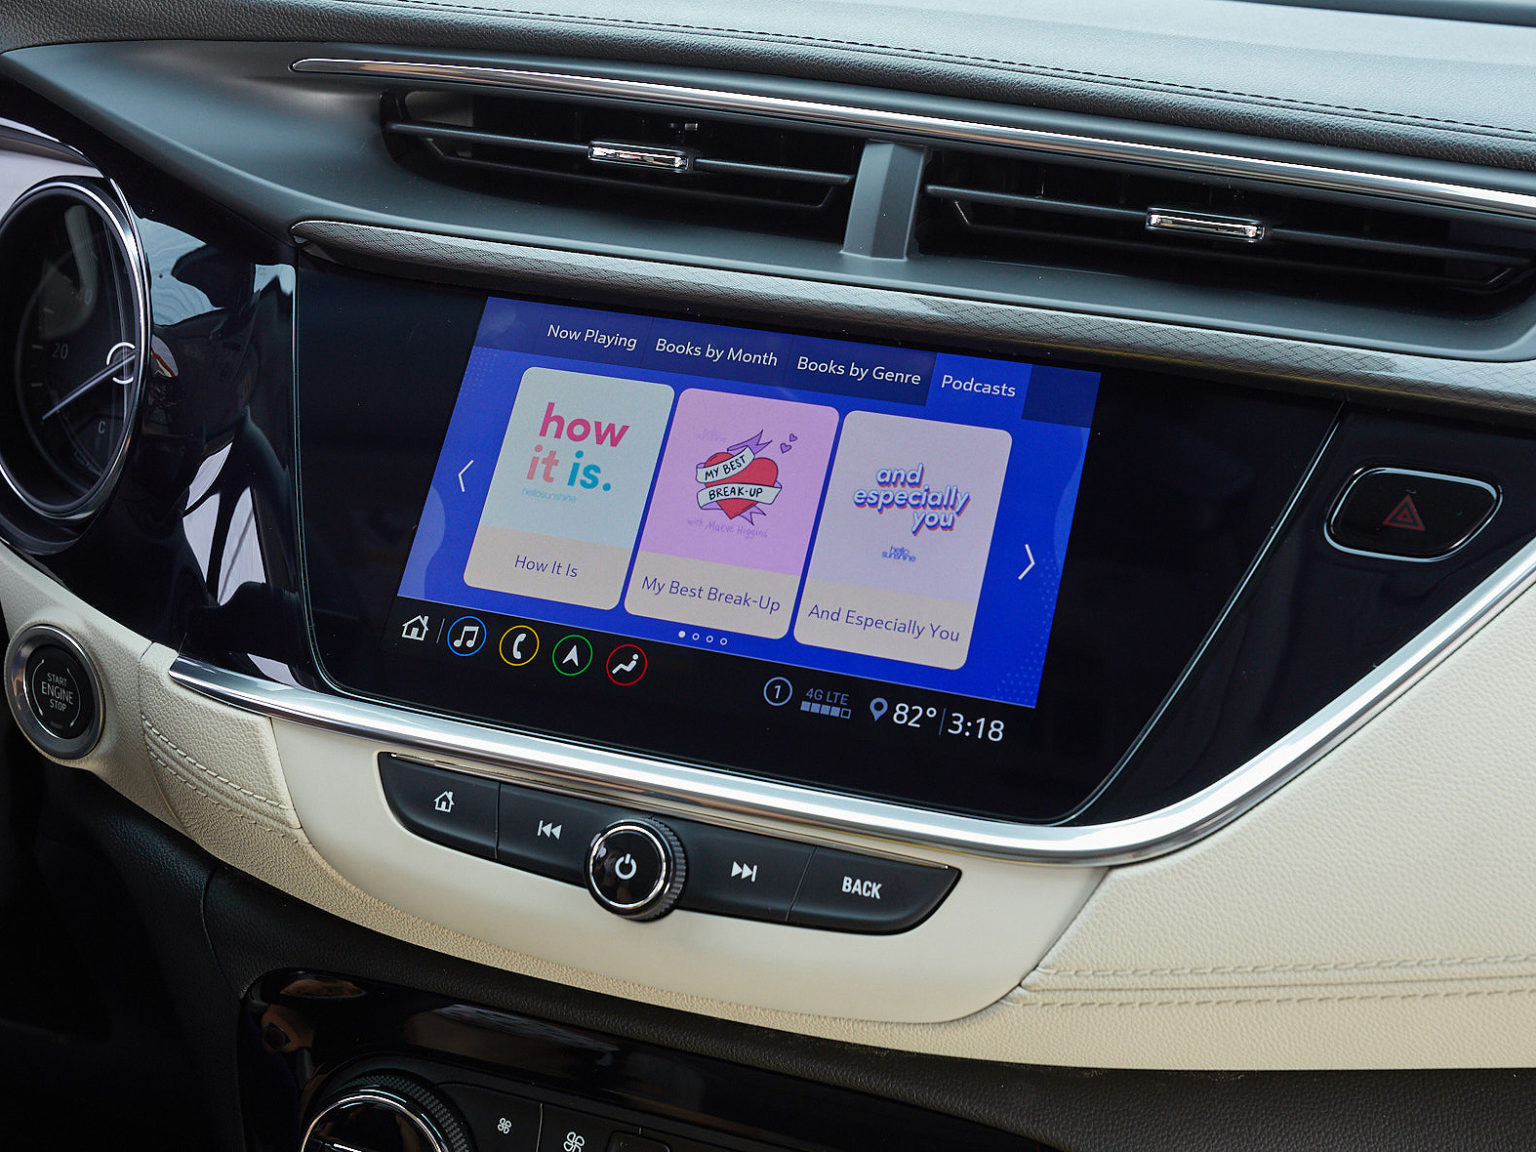 Drivers can select the audiobook or podcast of their choosing to listen to in the SUV as part of the new partnership.